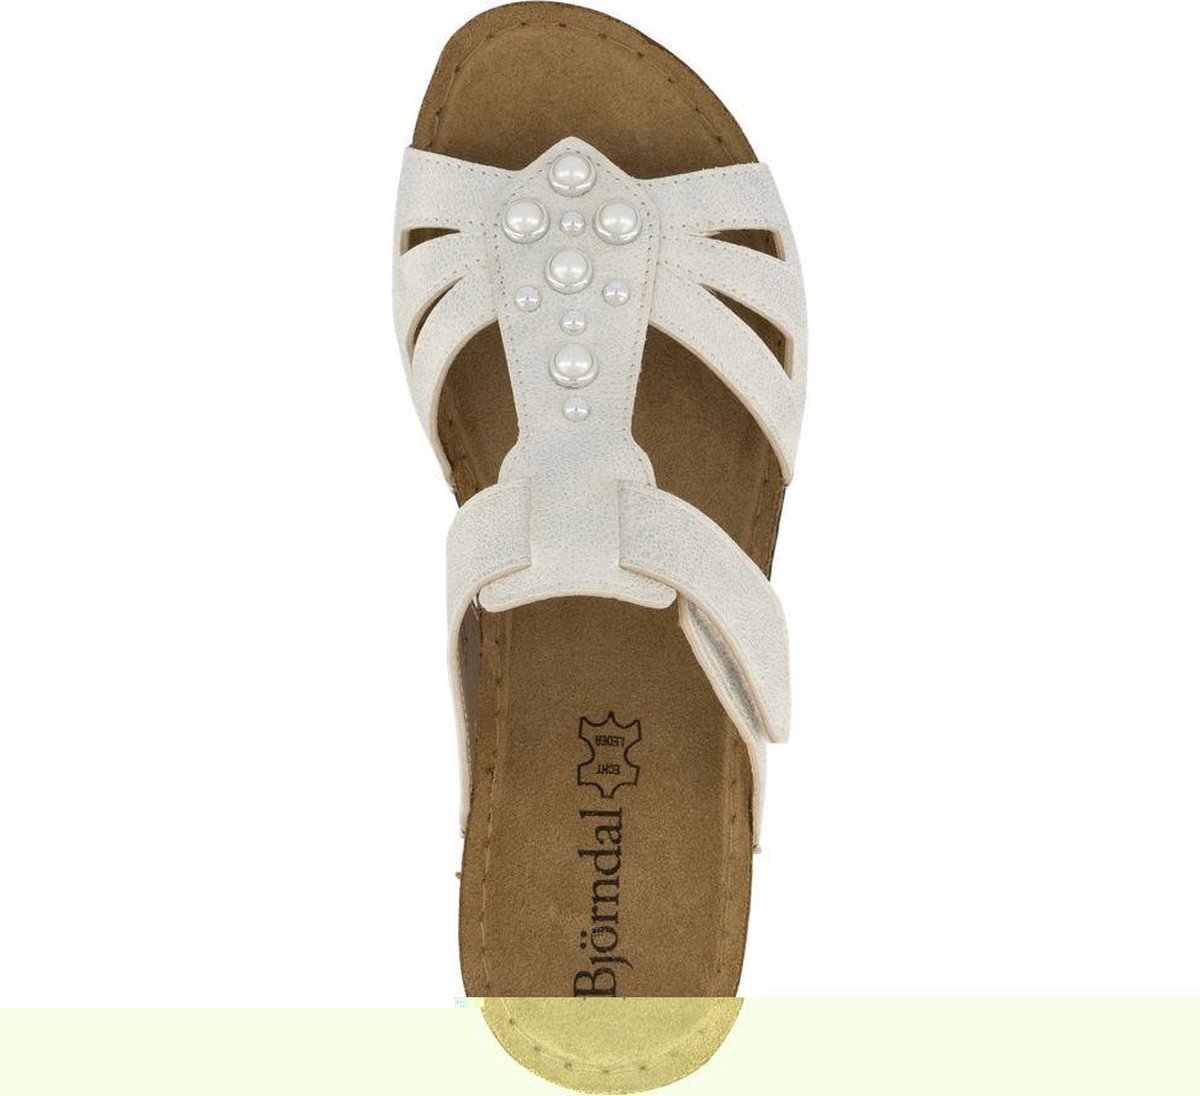 Art. 83234-10 Summer comfort slipper for women. Upper with velcro fastener.  Padded insole. Wide fit, Summer slippers